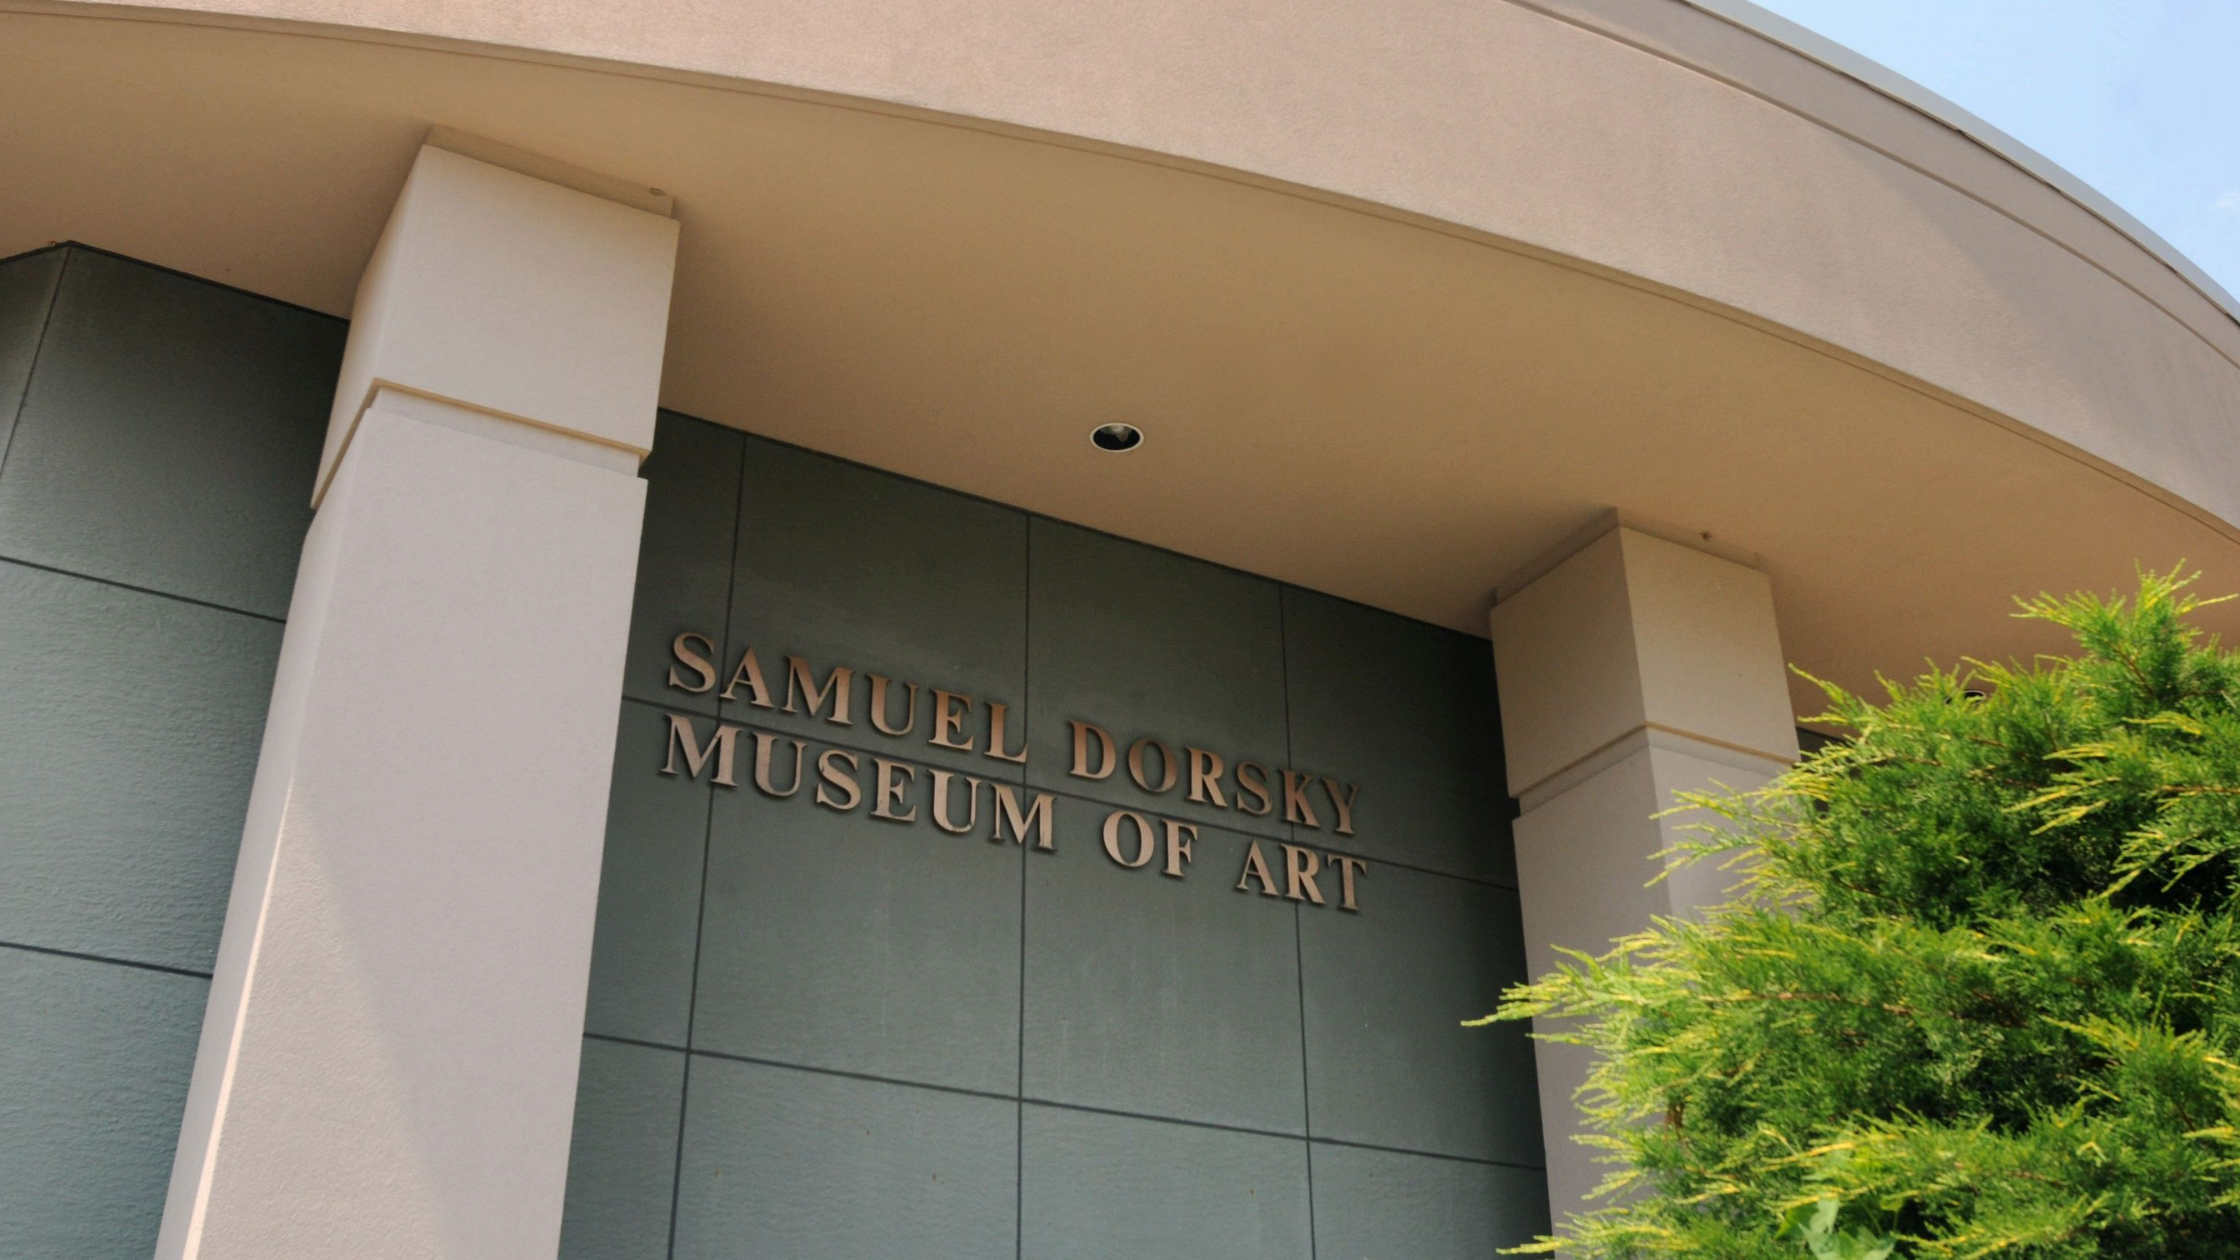 Exploring Art and Culture: A Journey through the Samuel Dorsky Museum of Art